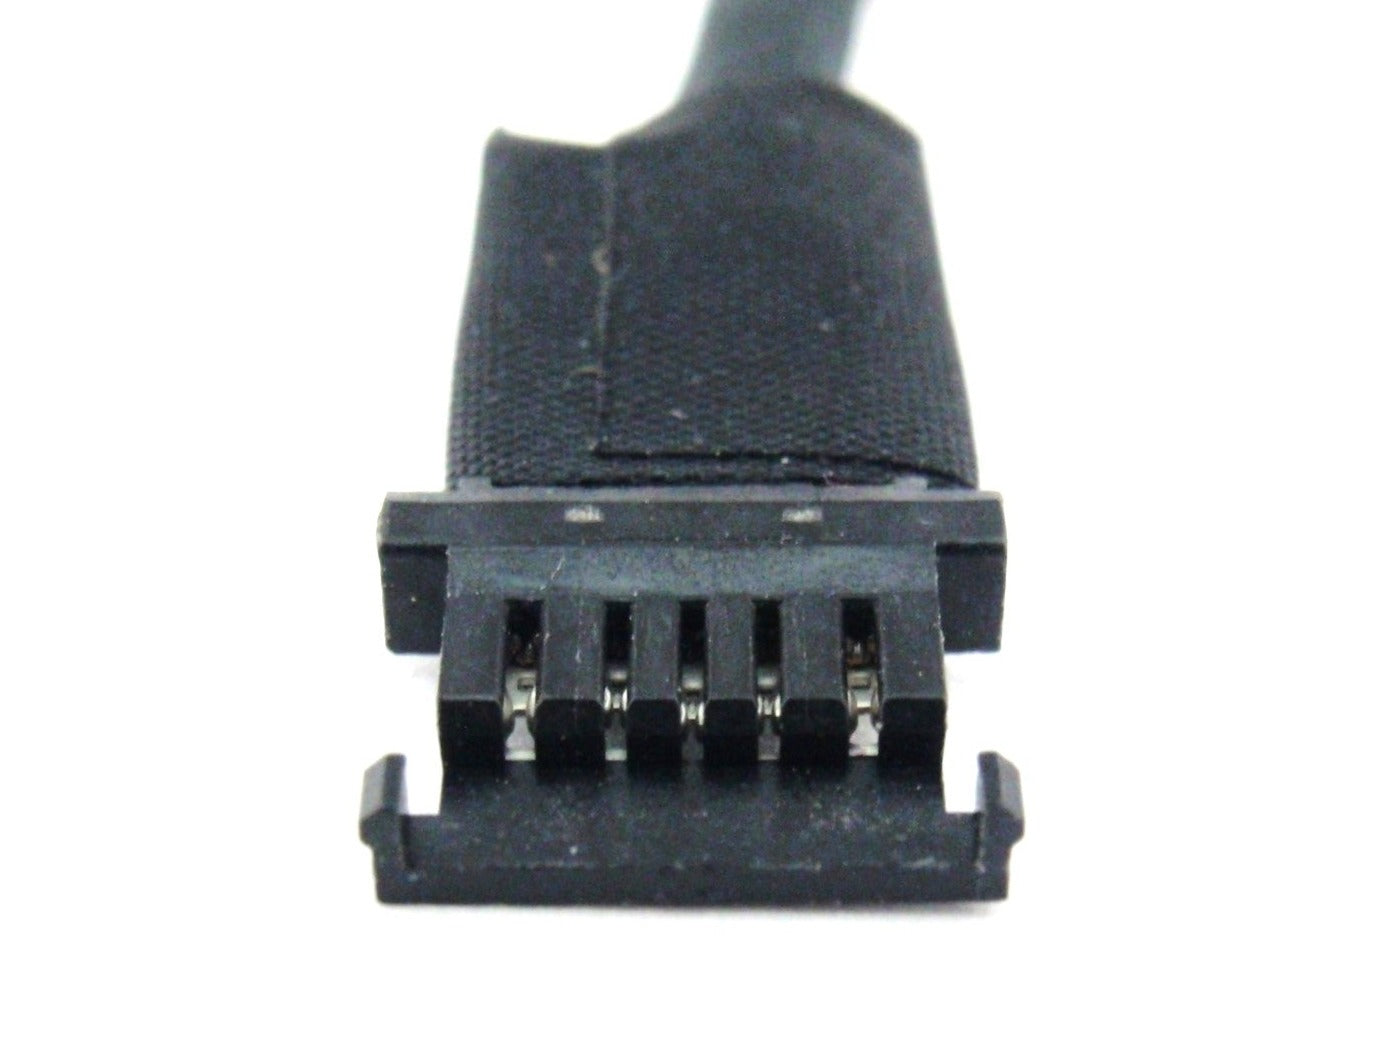 Lenovo New DC In Power Jack Charging Port Connector Cable ThinkPad Yoga 700-14ISK 80QD DC30100QF00 5C10K61157